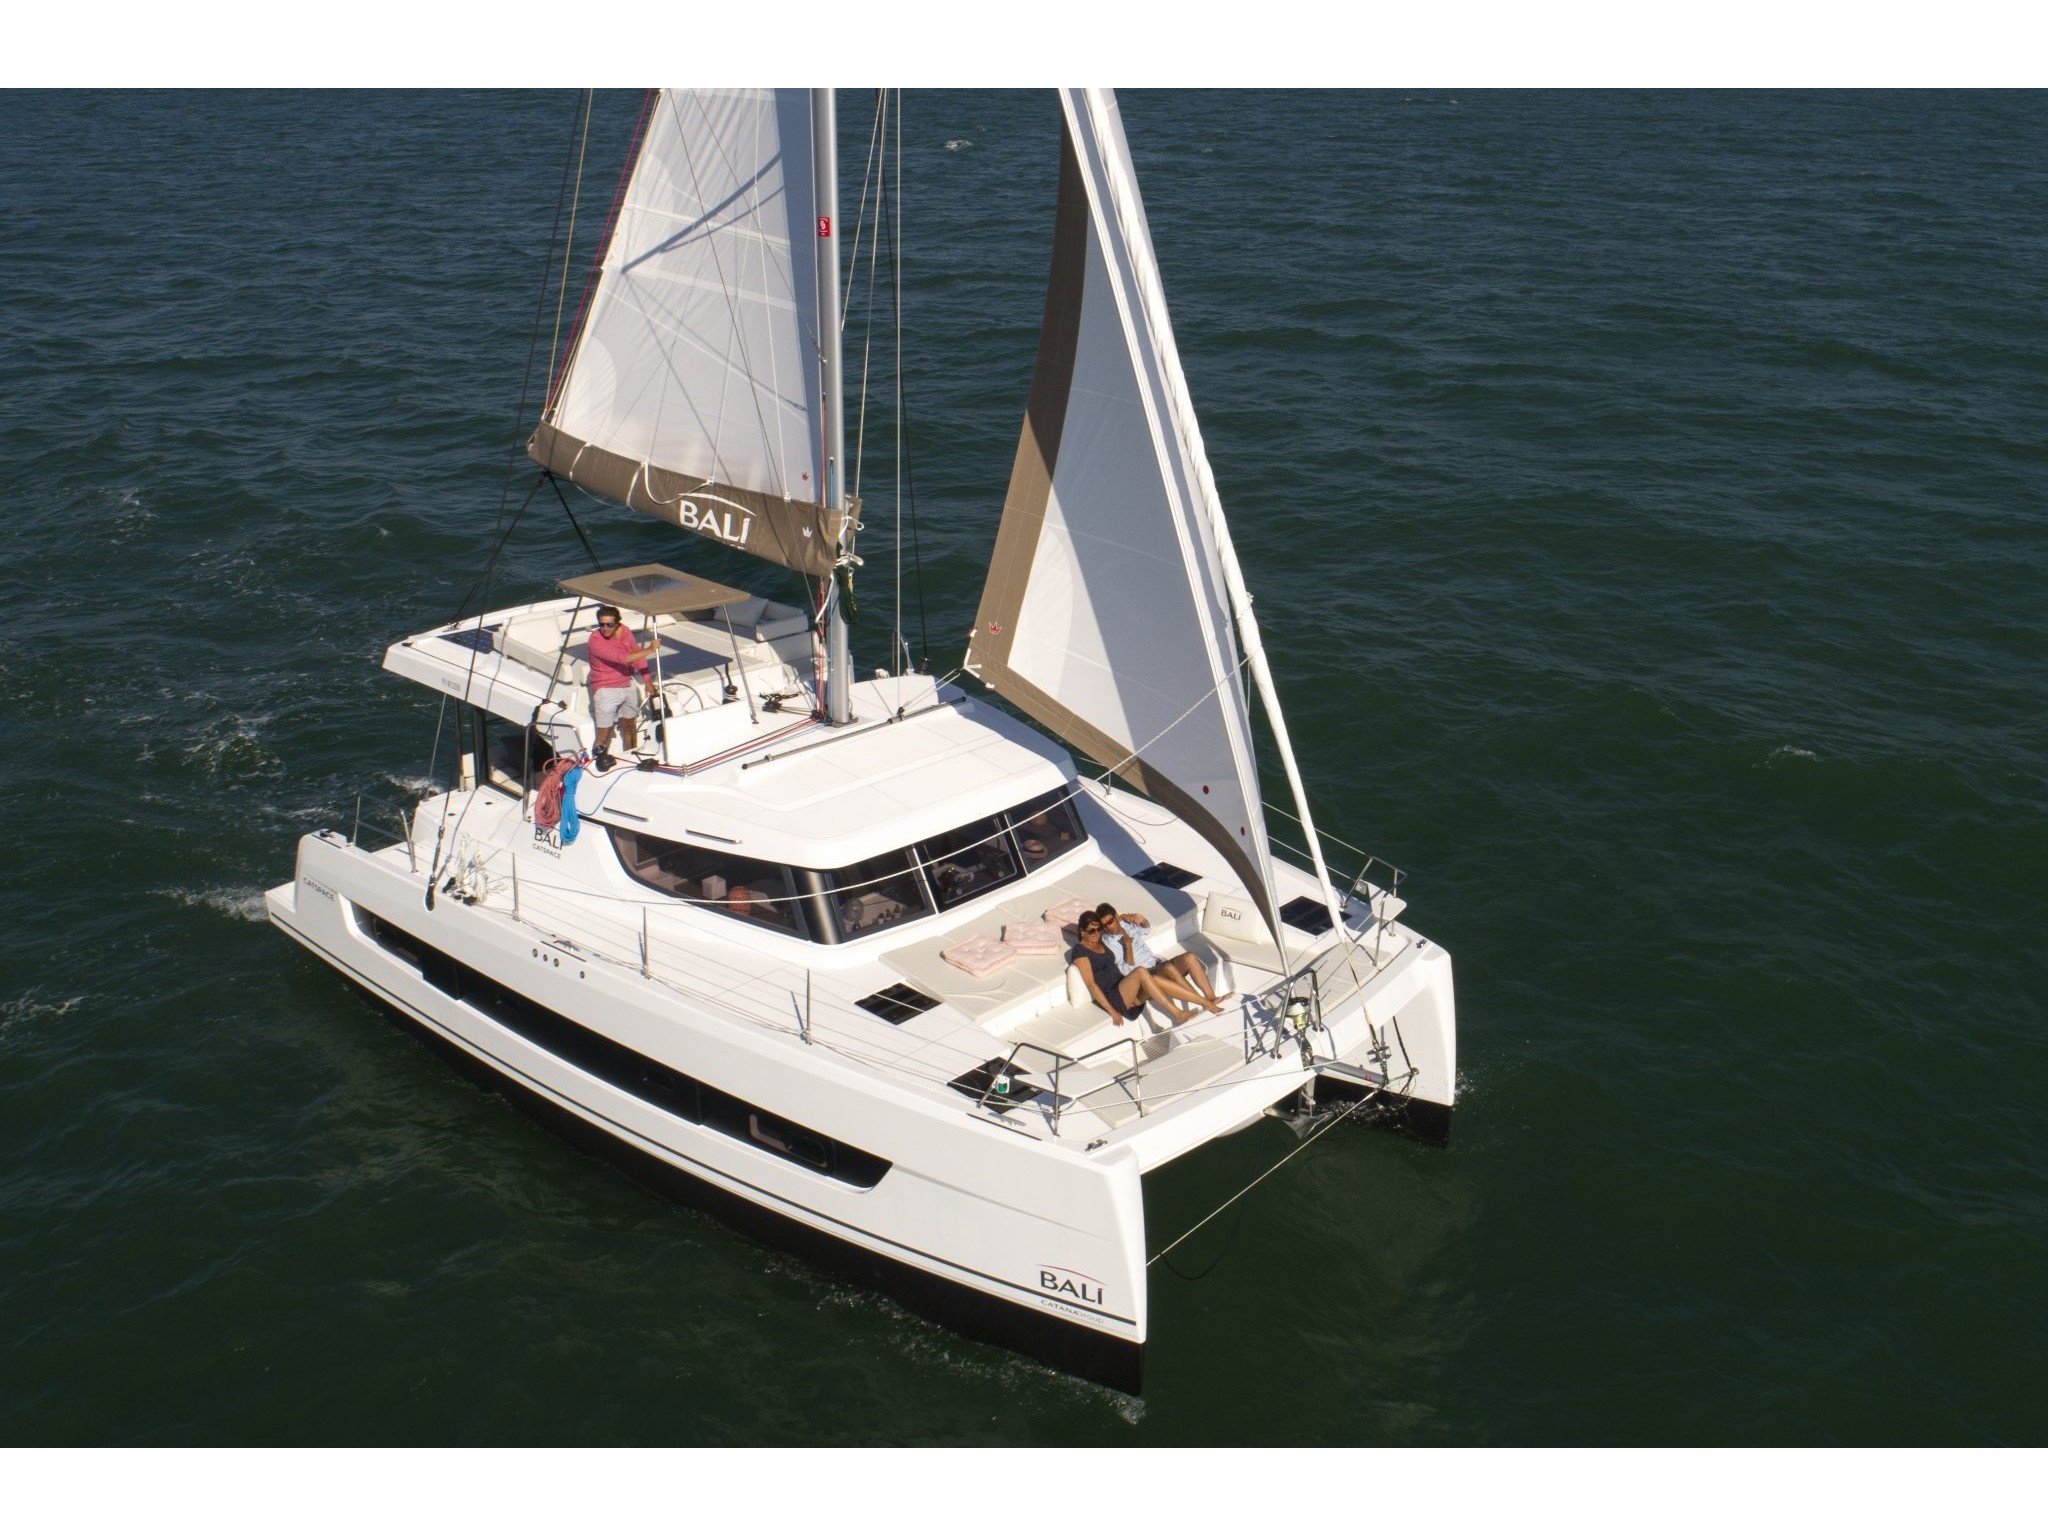 Bali Catspace - Yacht Charter Spain & Boat hire in Spain Balearic Islands Ibiza and Formentera Ibiza Sant Antoni de Portmany Sant Antoni de Portmany Port 2